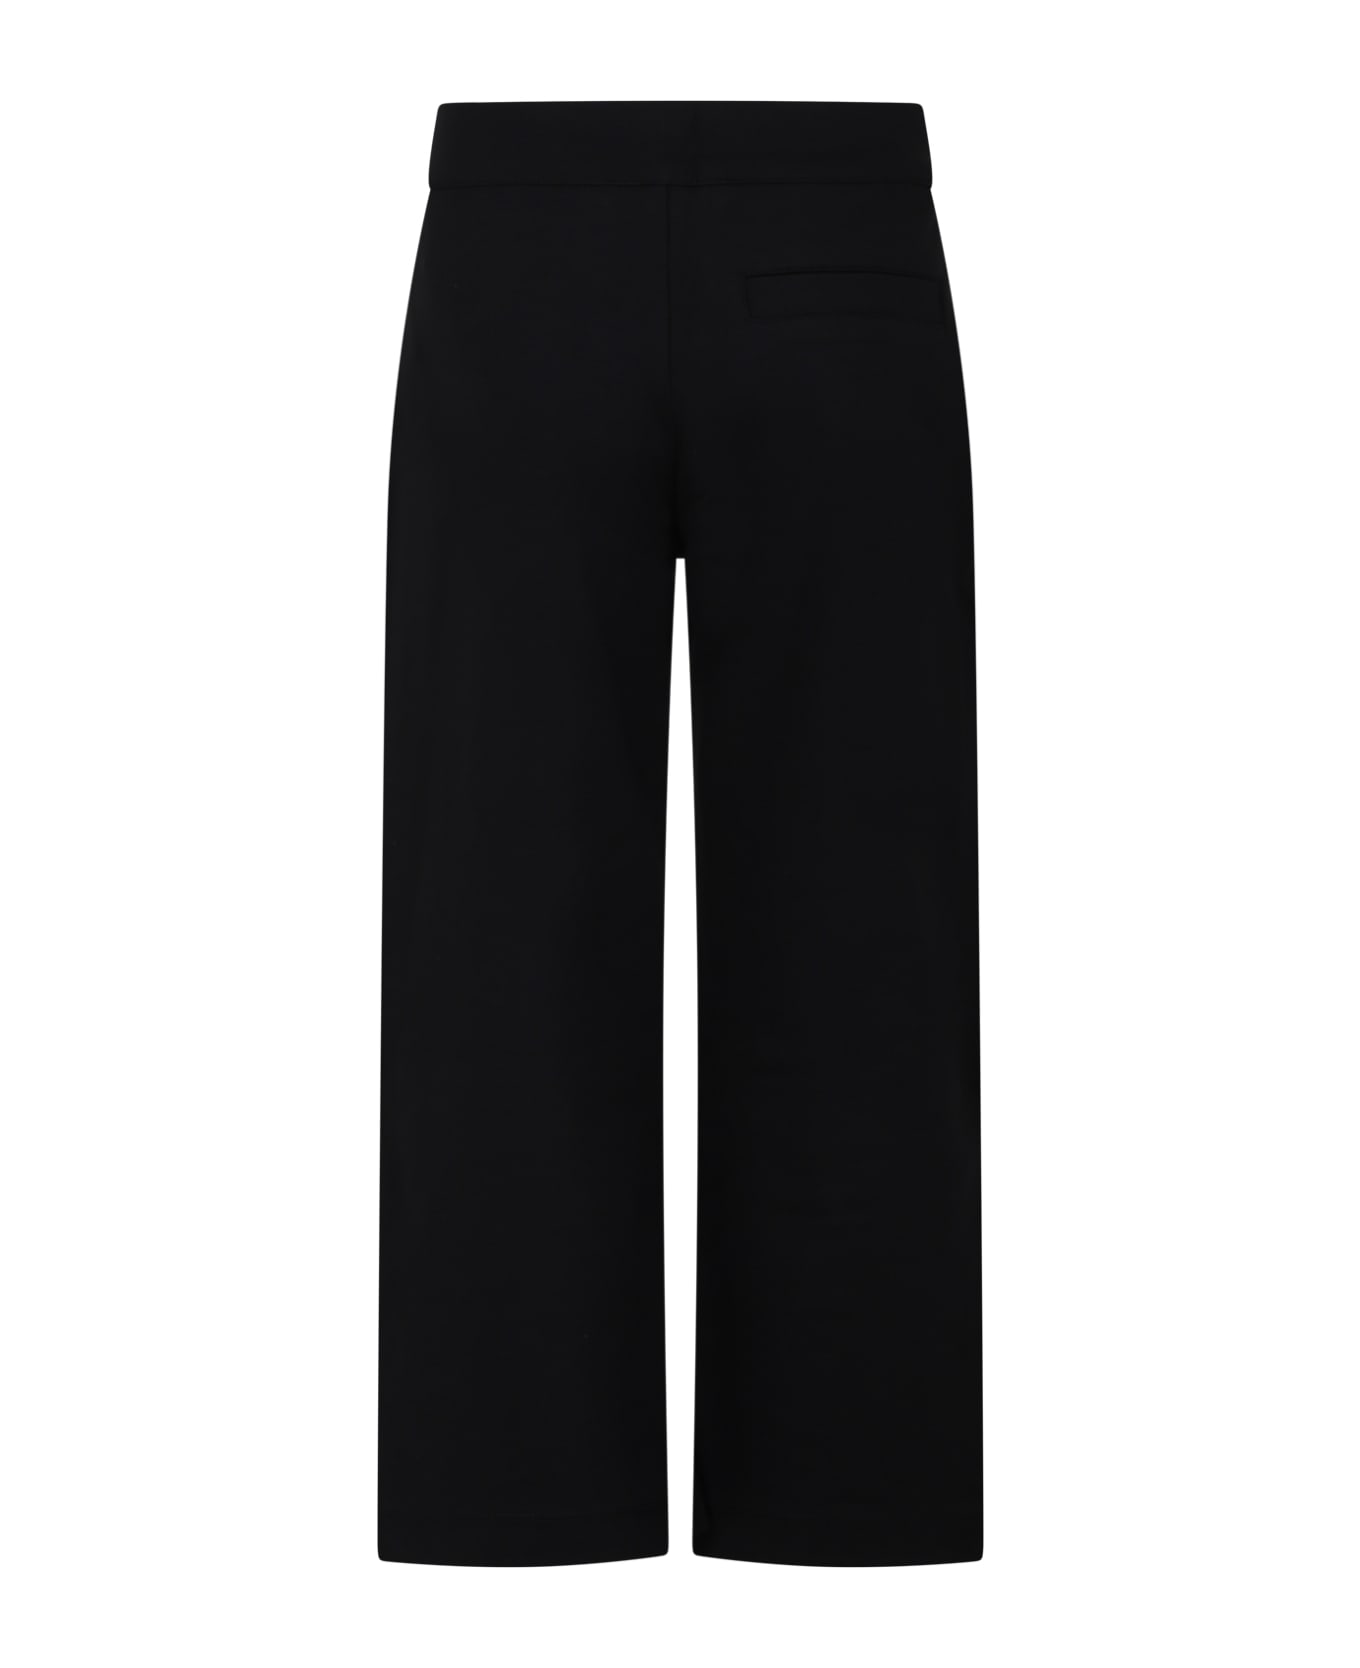 Calvin Klein Black Trousers For Girl With Logo - Black ボトムス